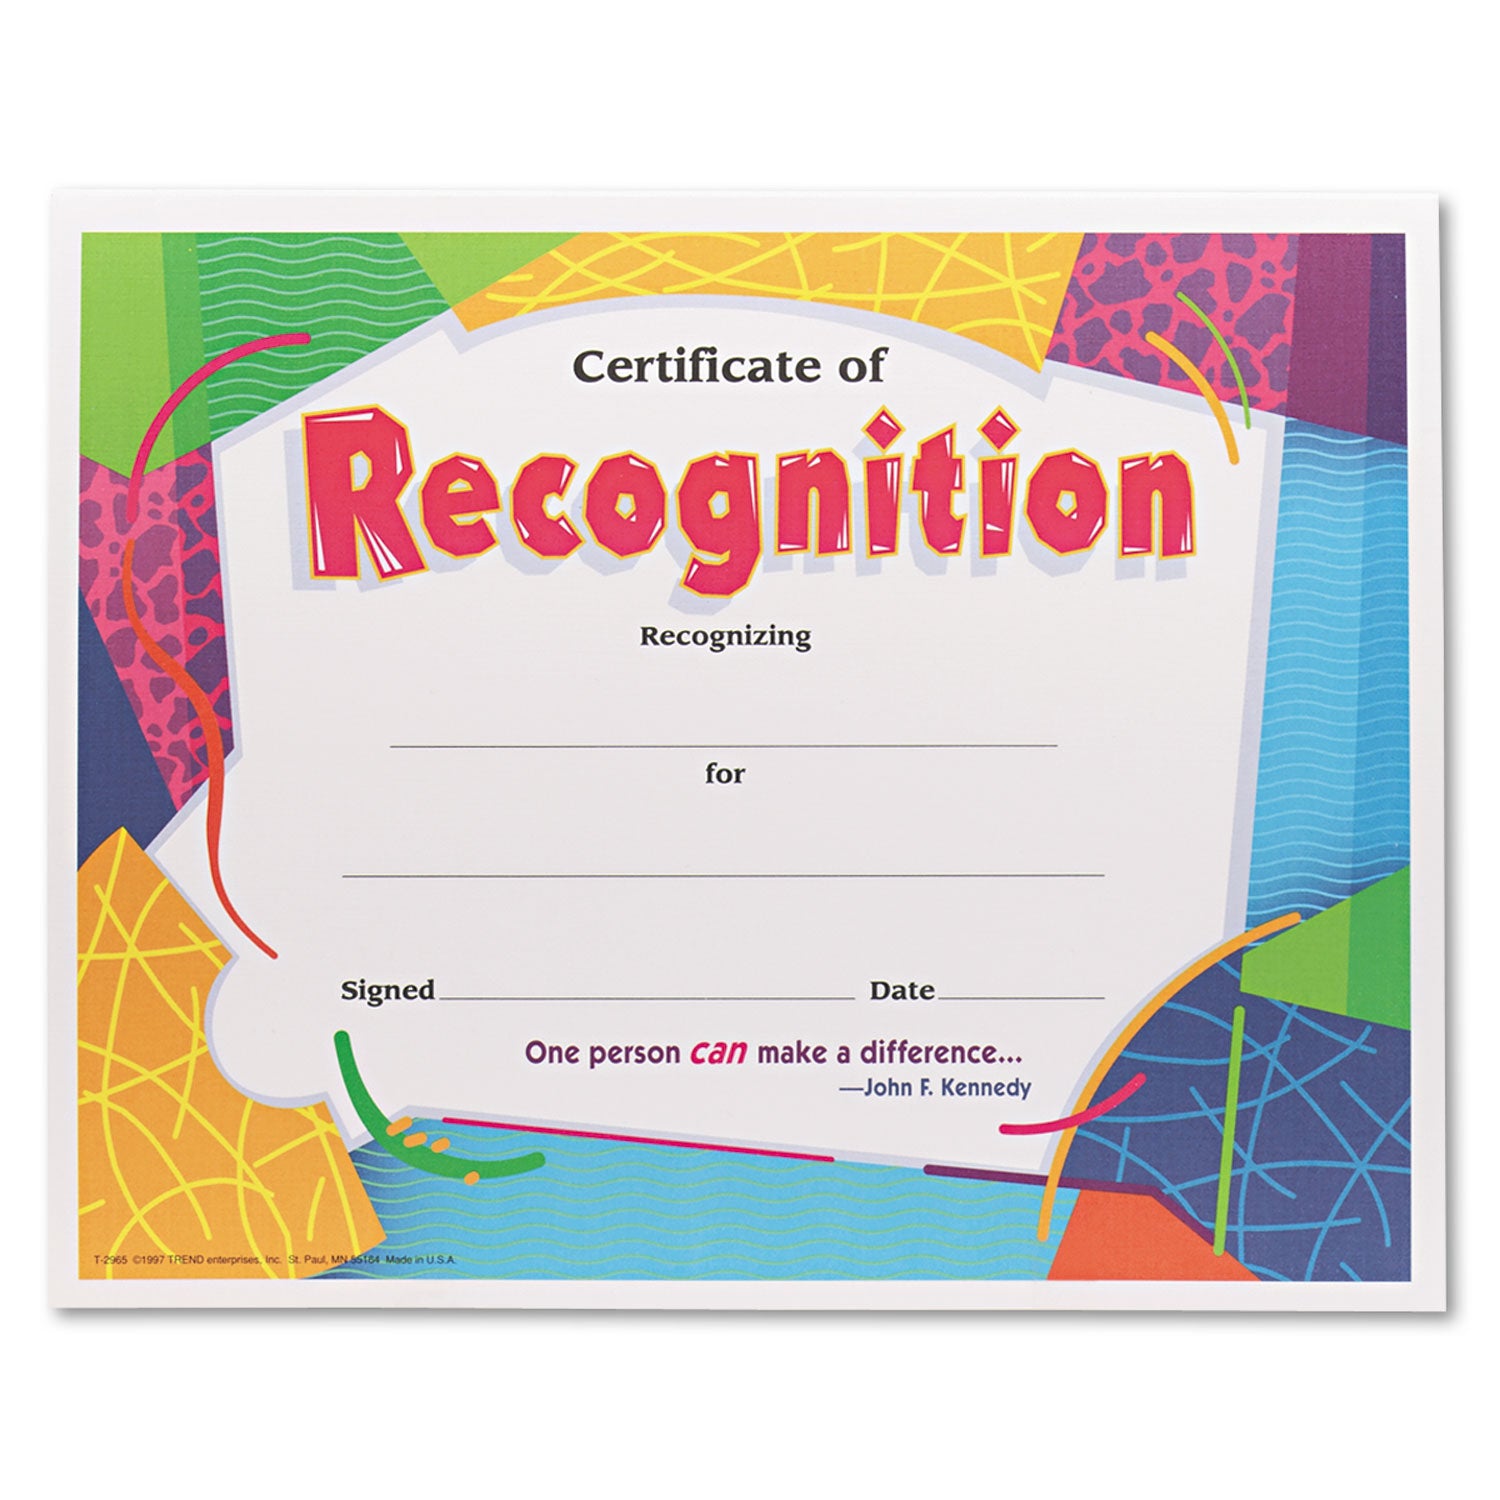 Certificate of Recognition Awards, 11 x 8.5, Horizontal Orientation, Assorted Colors with White Border, 30/Pack - 